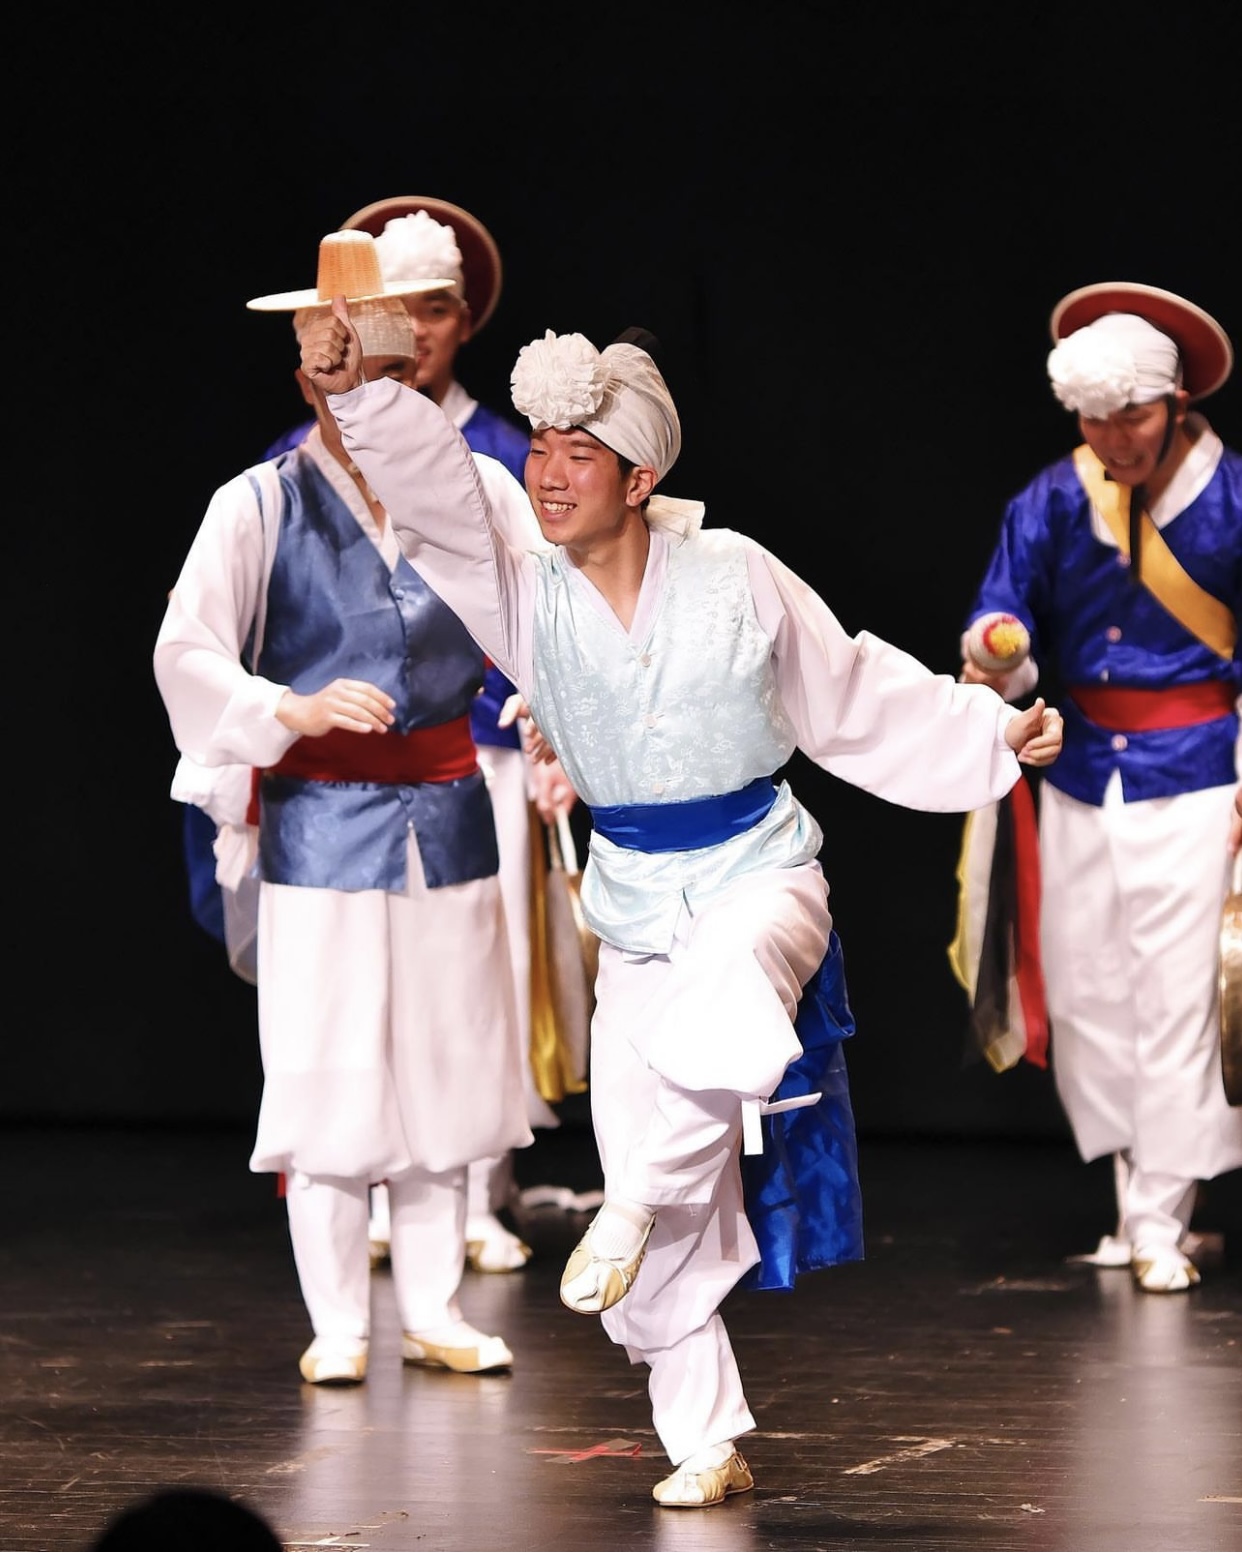 Dance and performing arts in South Korea